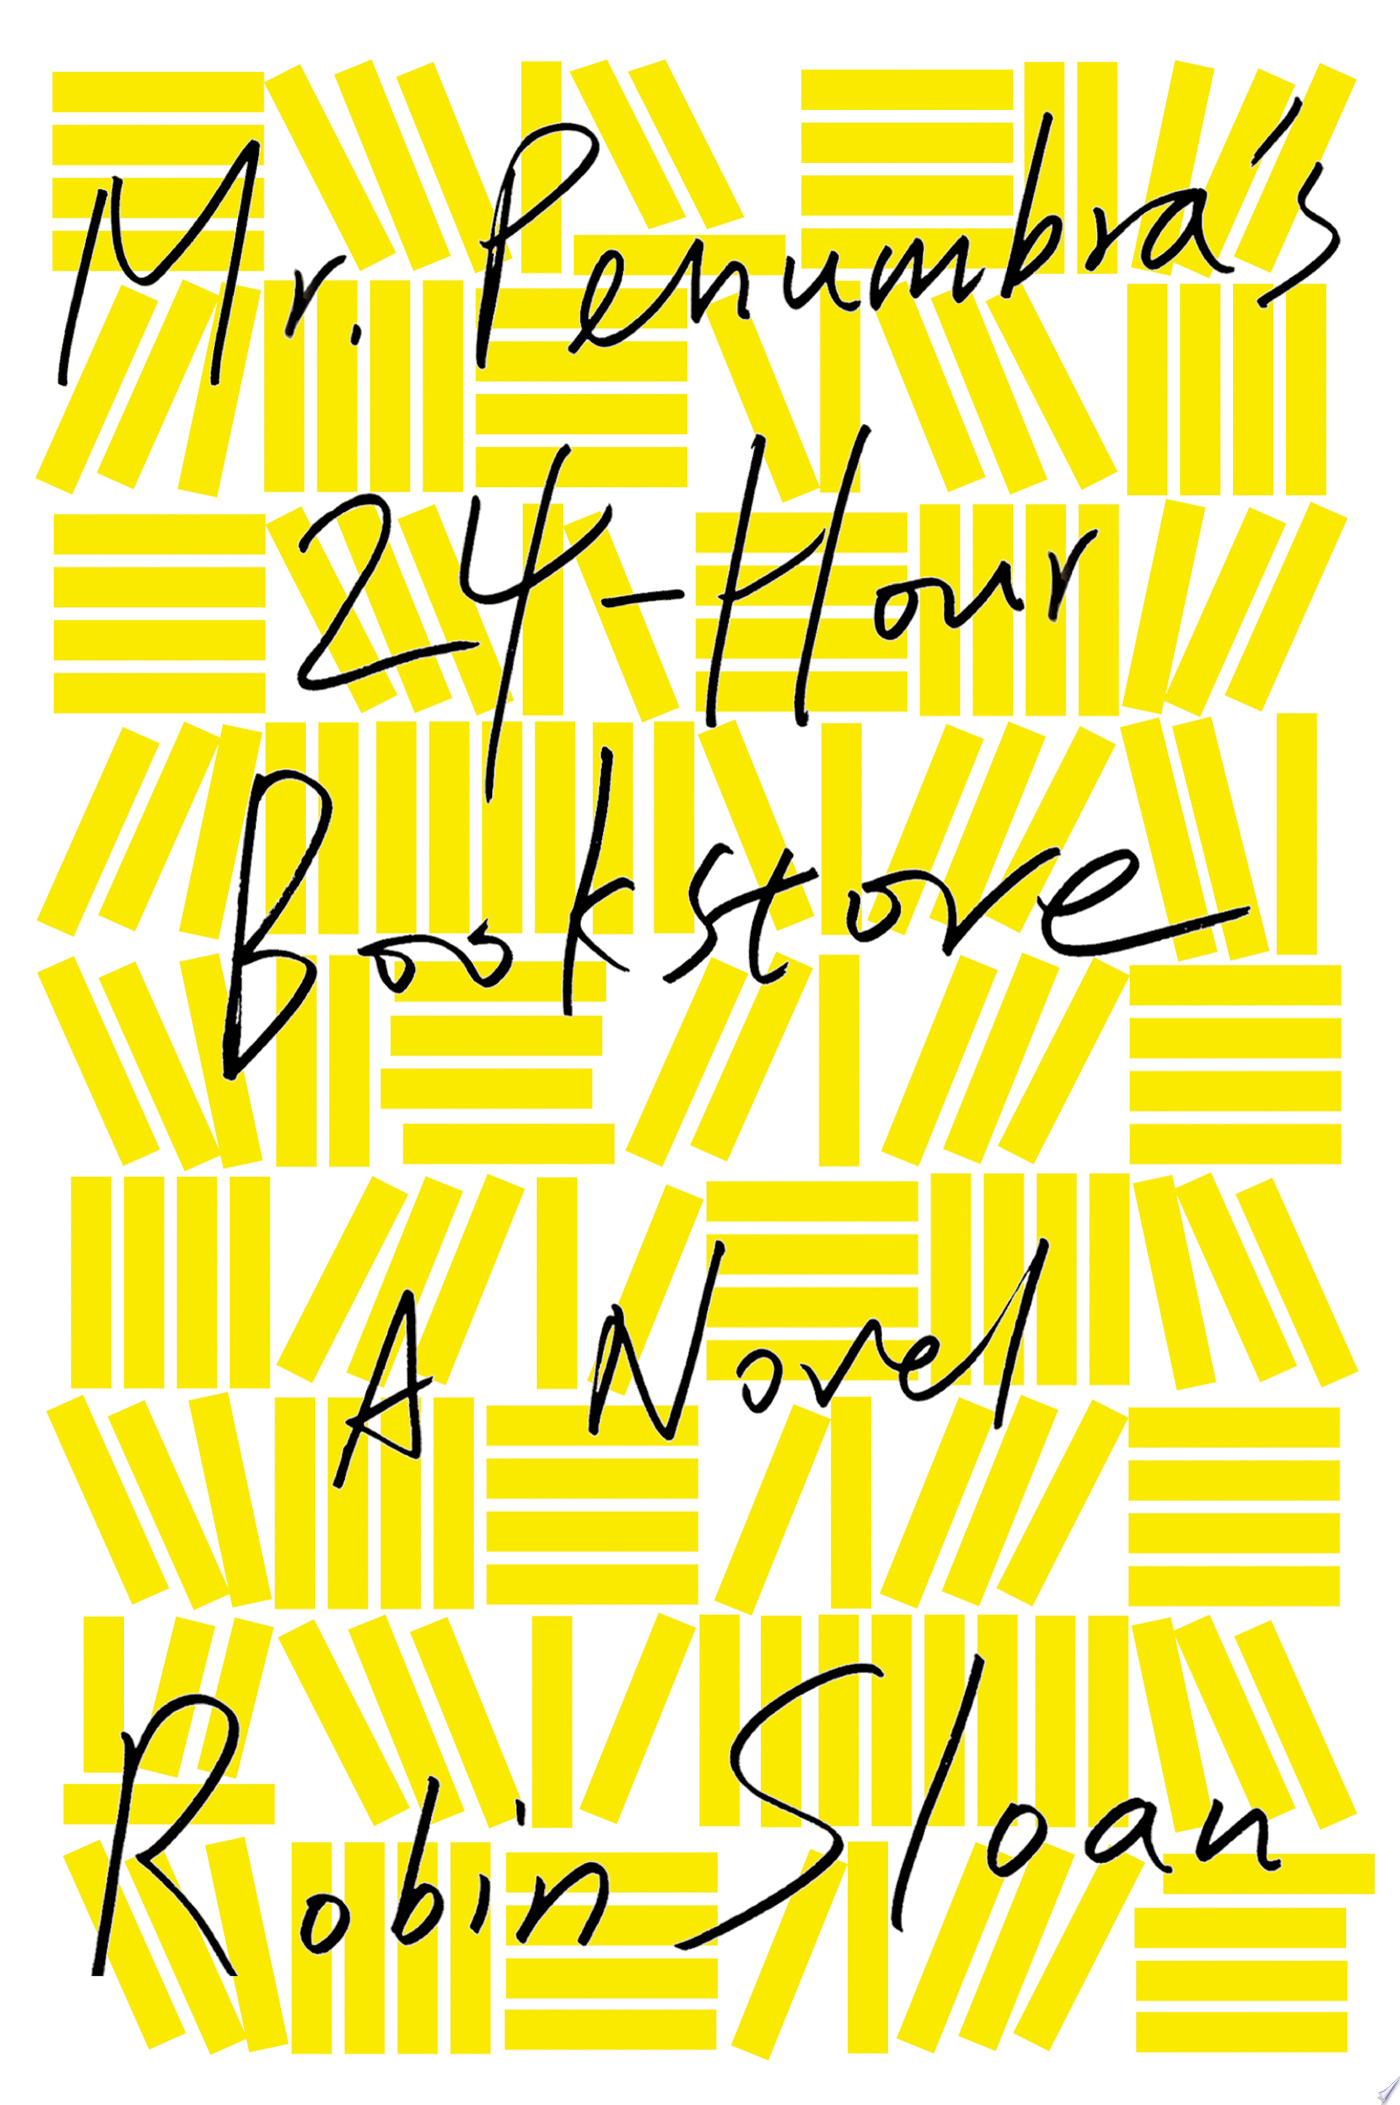 Image for "Mr. Penumbra's 24-Hour Bookstore"